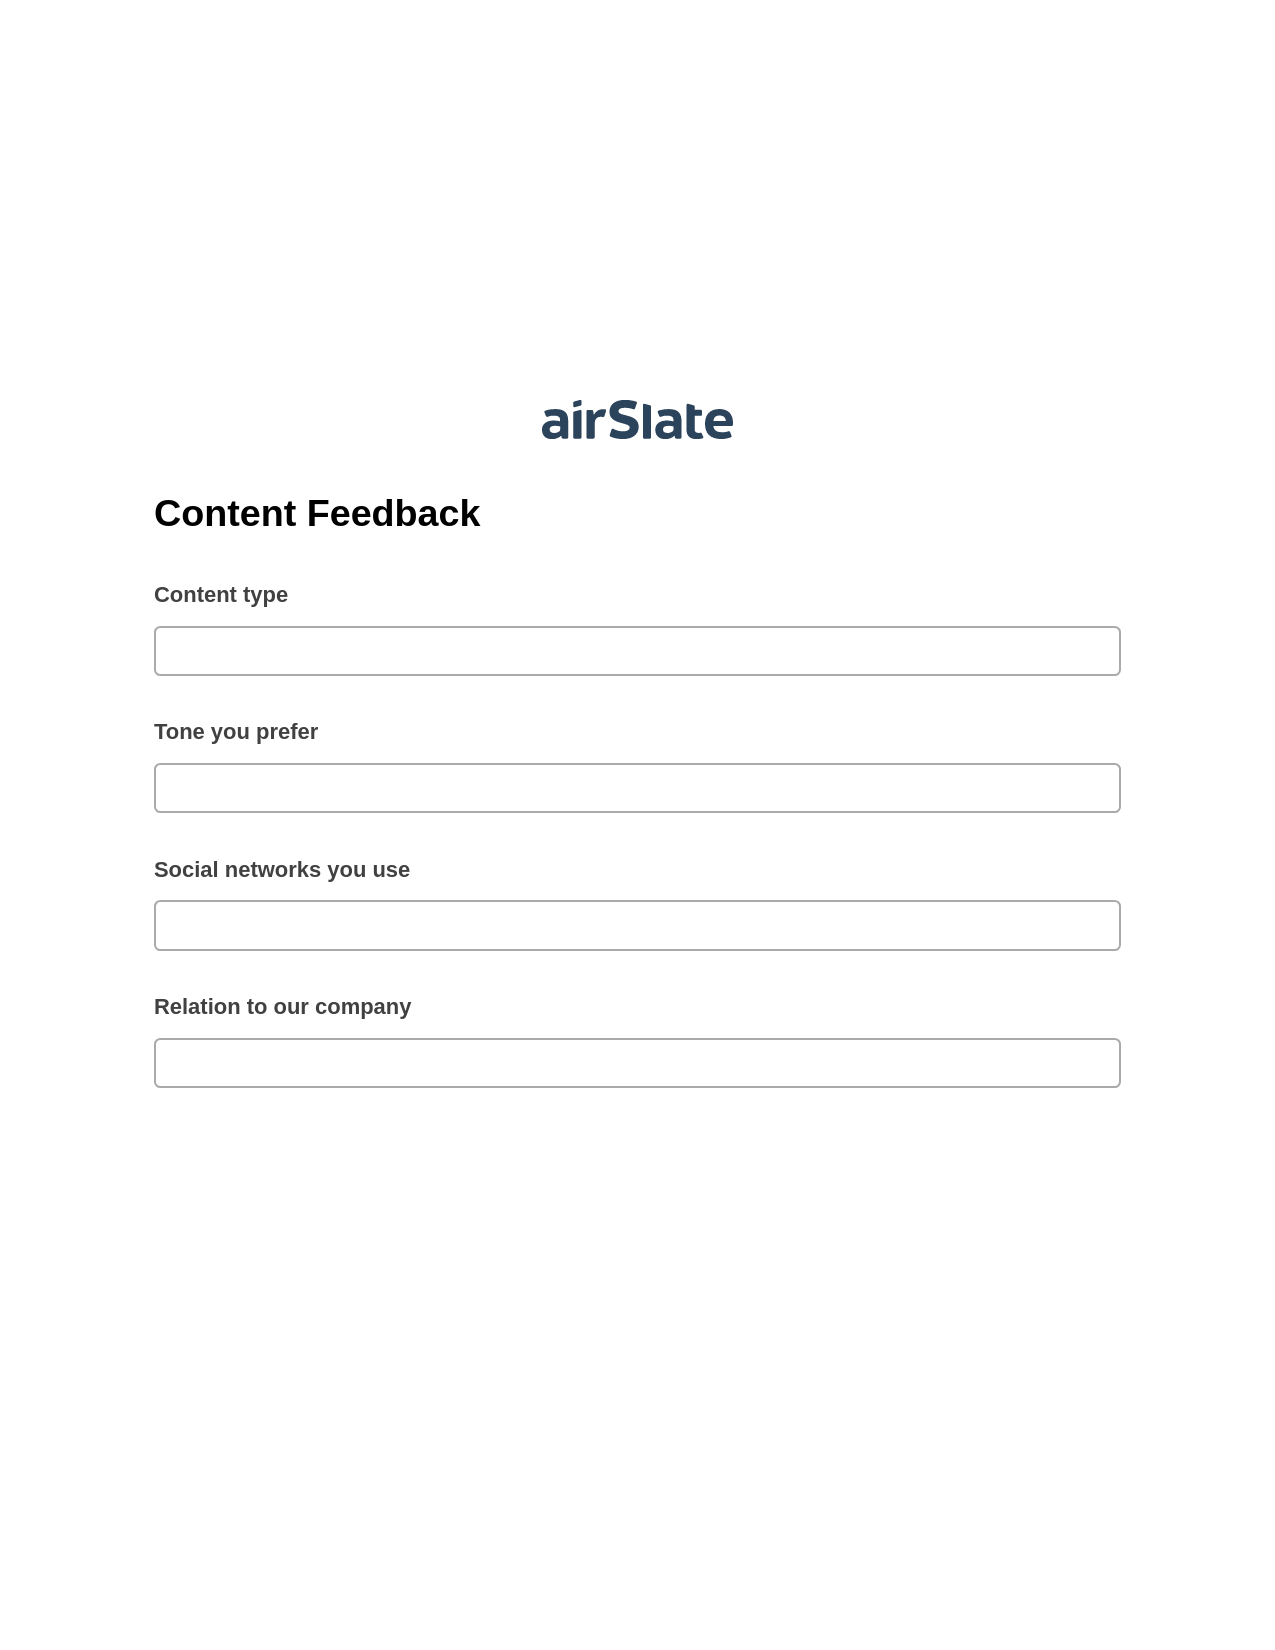 Multirole Content Feedback Pre-fill Slate from MS Dynamics 365 Records Bot, Create Slate every Google Sheet Update Bot, OneDrive Bot